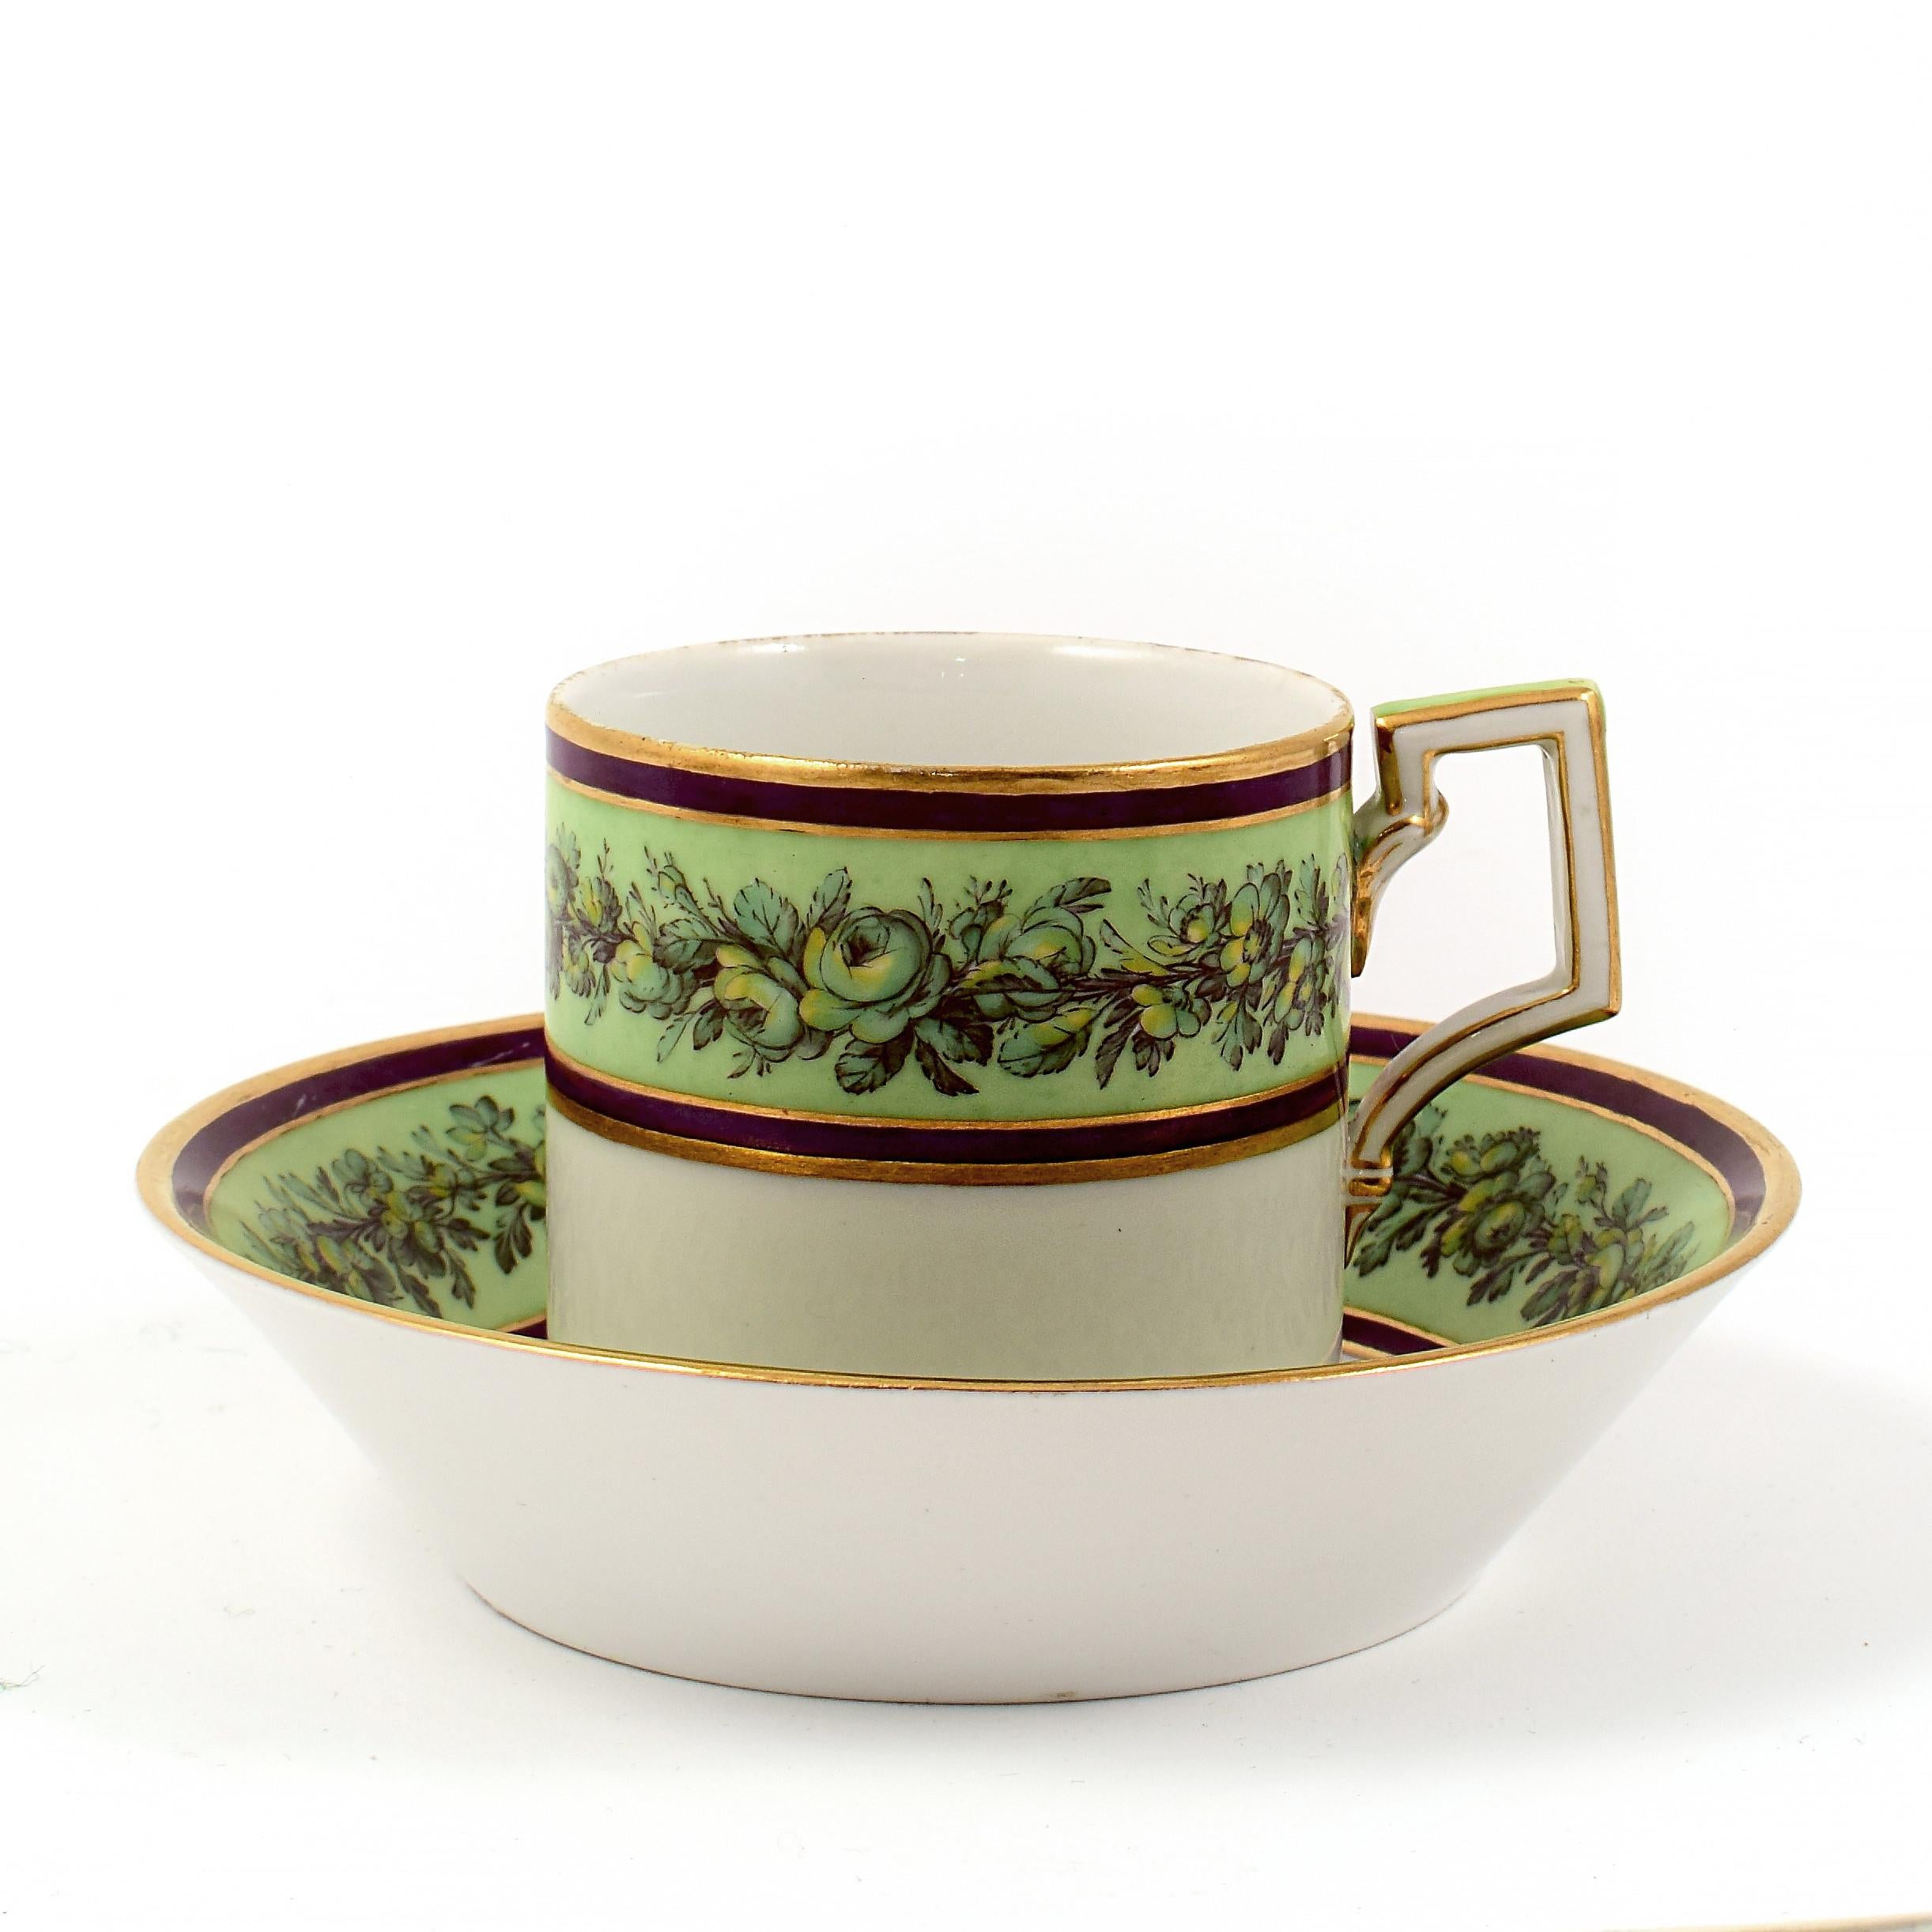 German KPM Empire Porcelain Cup and Saucer Decorated with a Green Flower Border